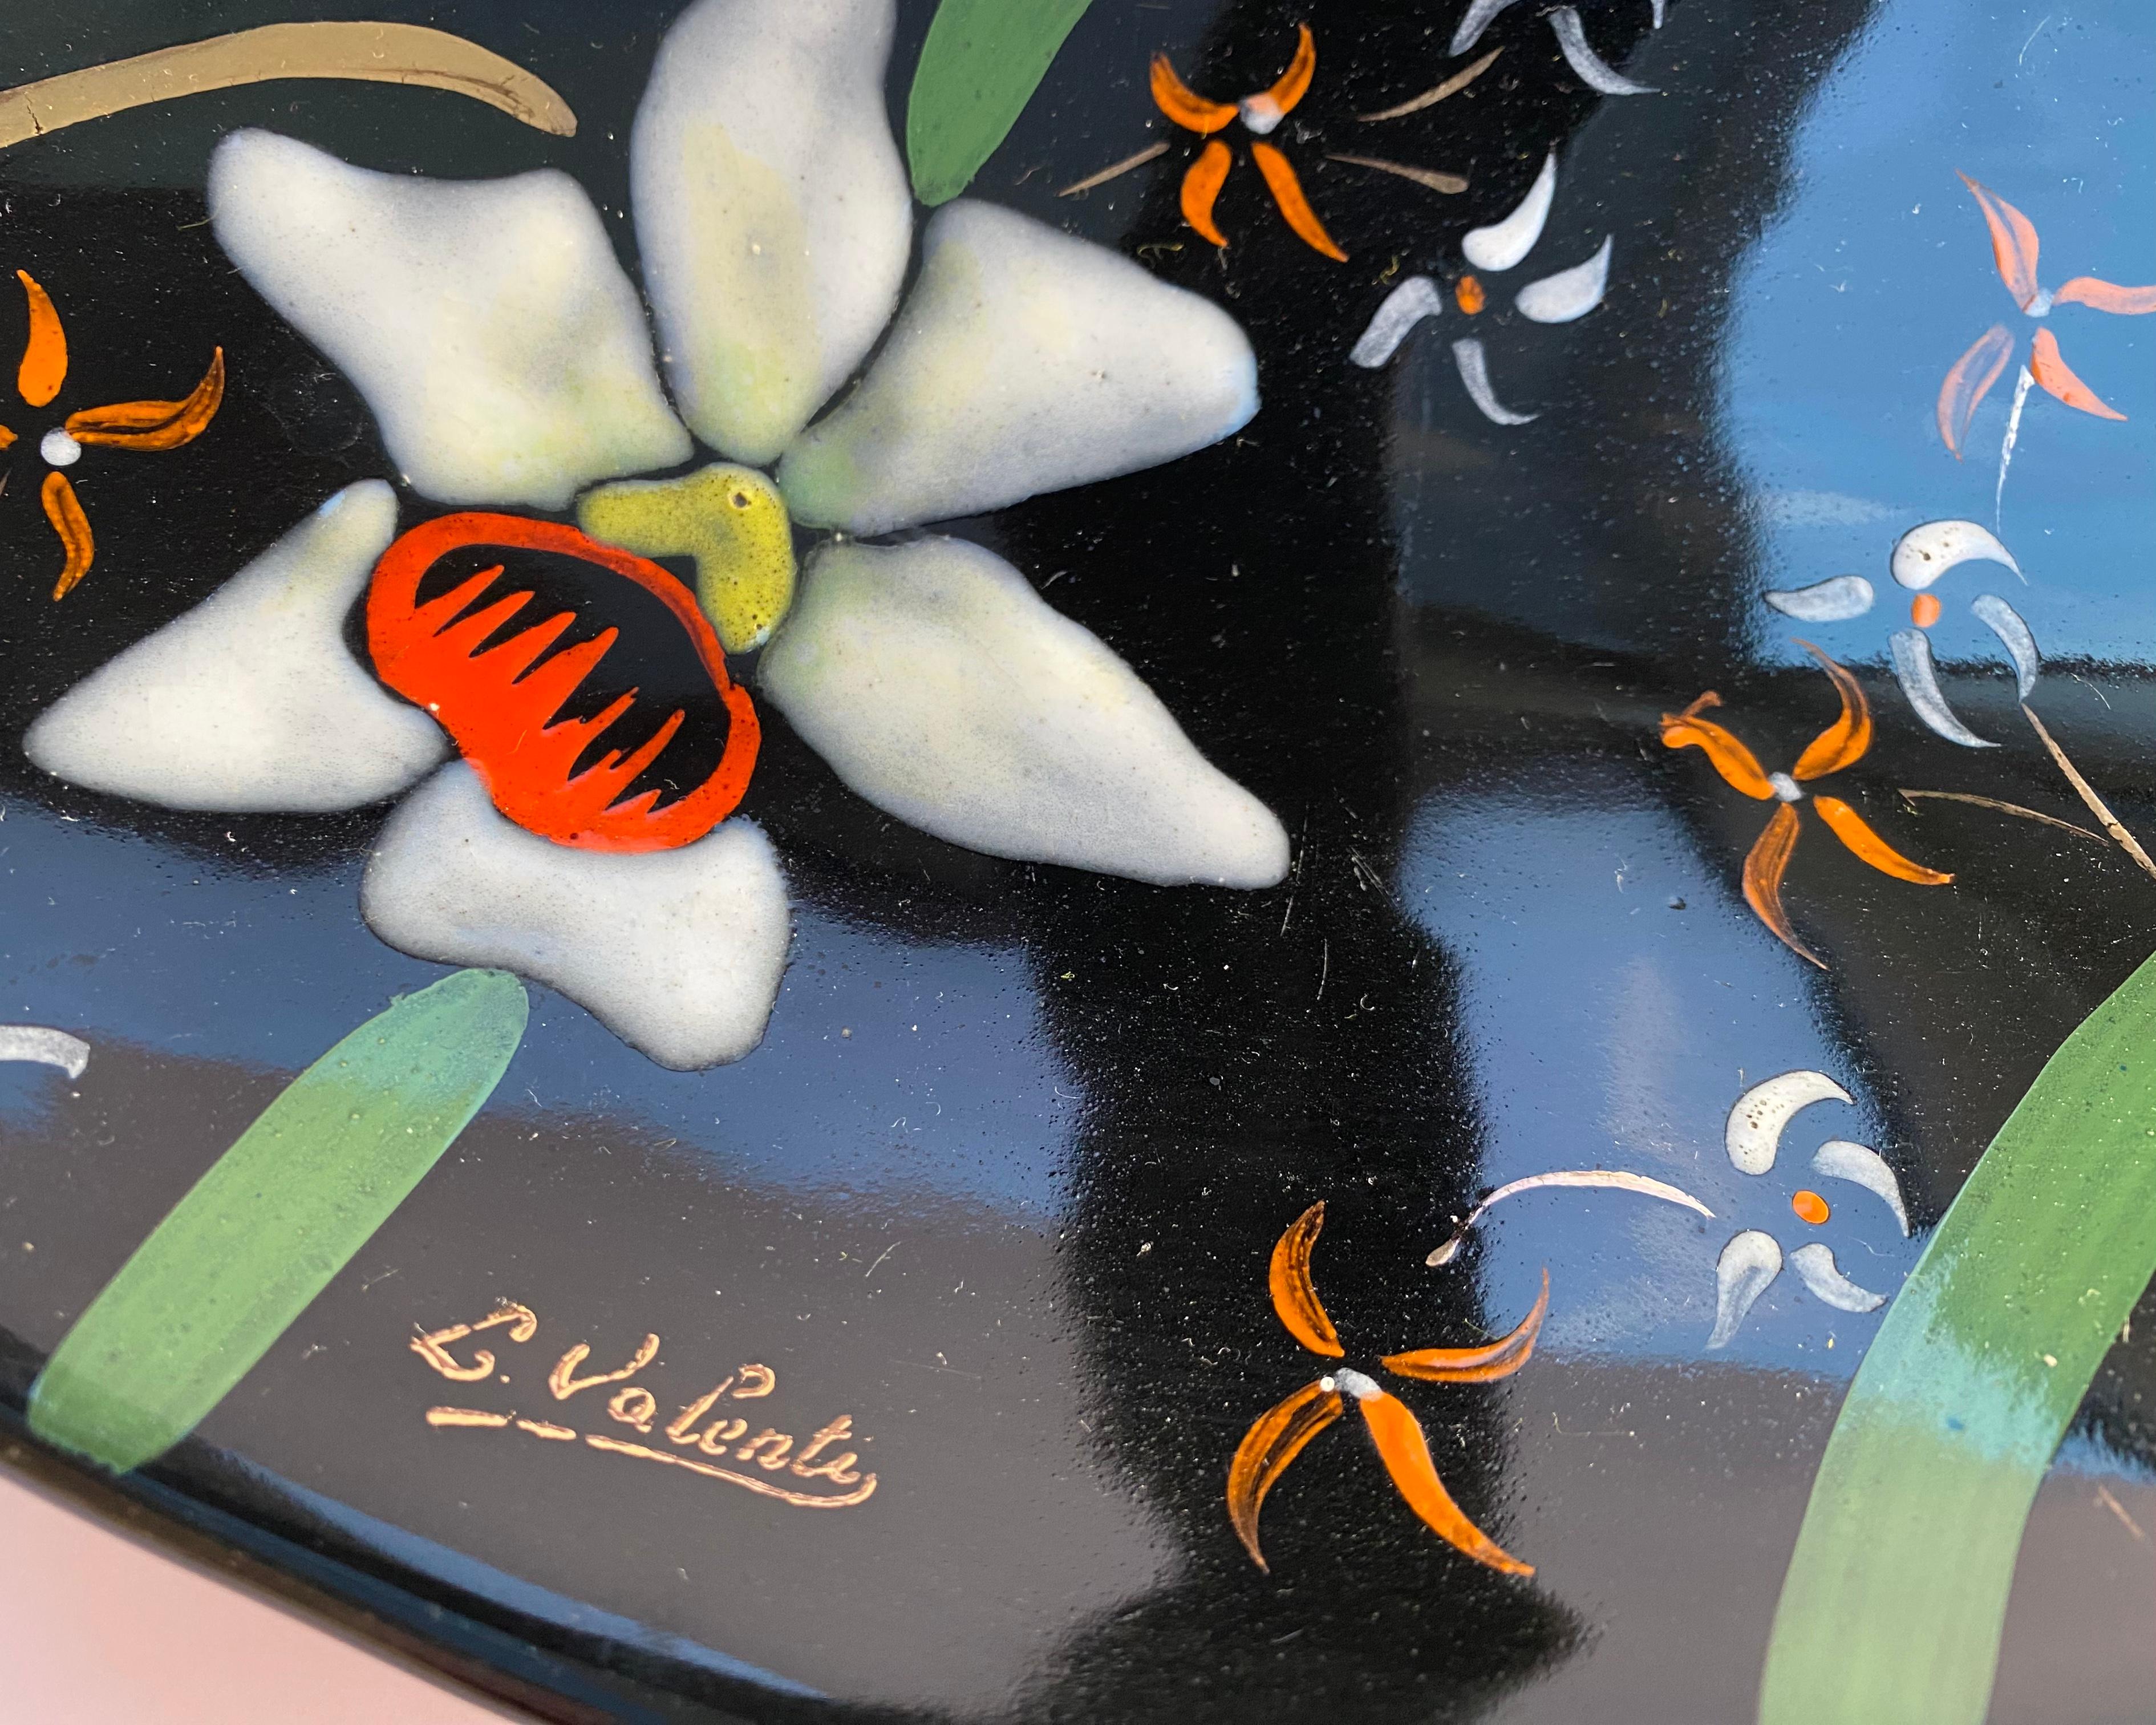 Longwy Serving Fruit Bowl Hand Painted Floral Dish Glazed Ceramic France In Excellent Condition For Sale In Bastogne, BE